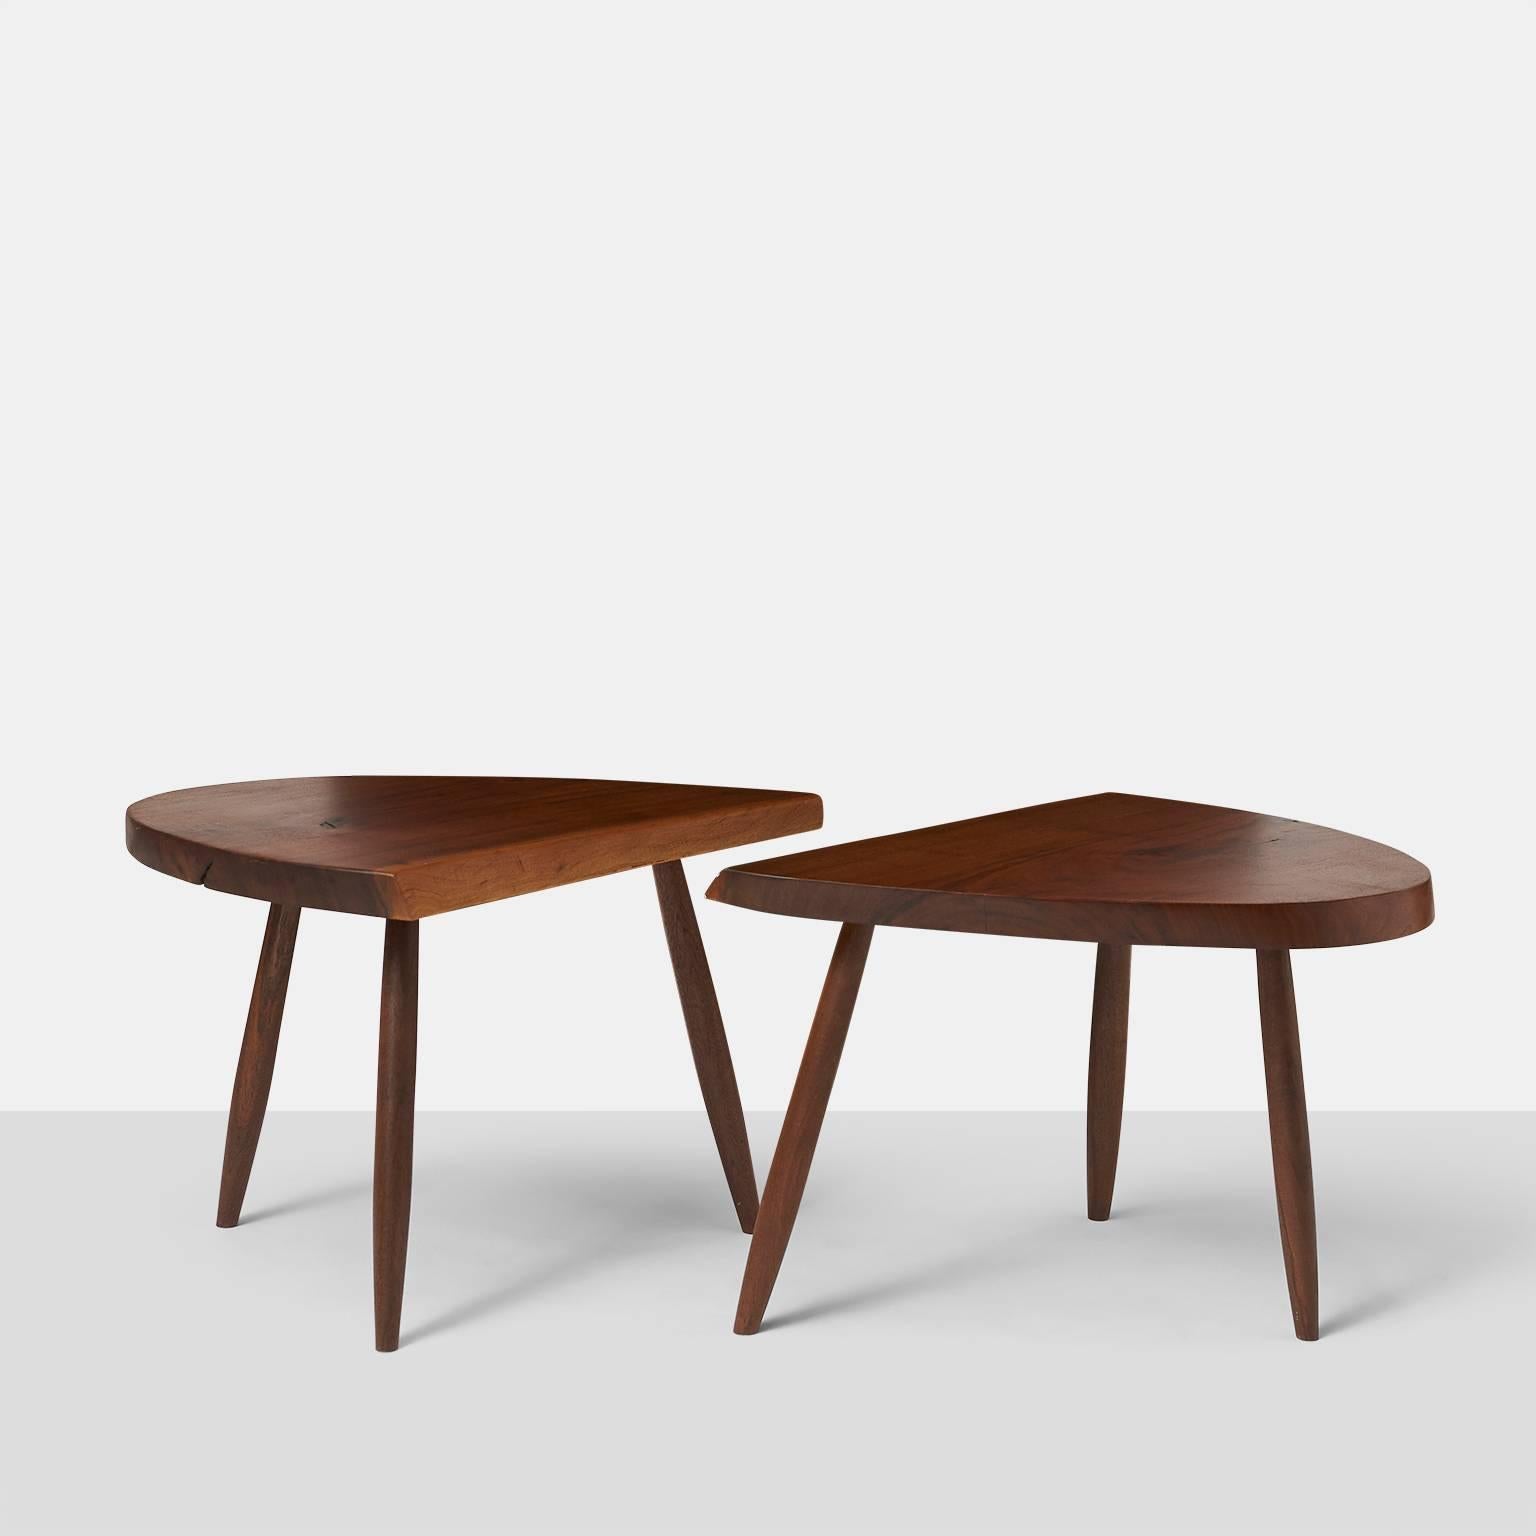 An elegant pair of studio crafted walnut coffee tables with eased edge by American woodworker Phillip Lloyd Powell. These triangular tables are in an excellent condition. Measurement is for each piece.
USA, circa 1960s.